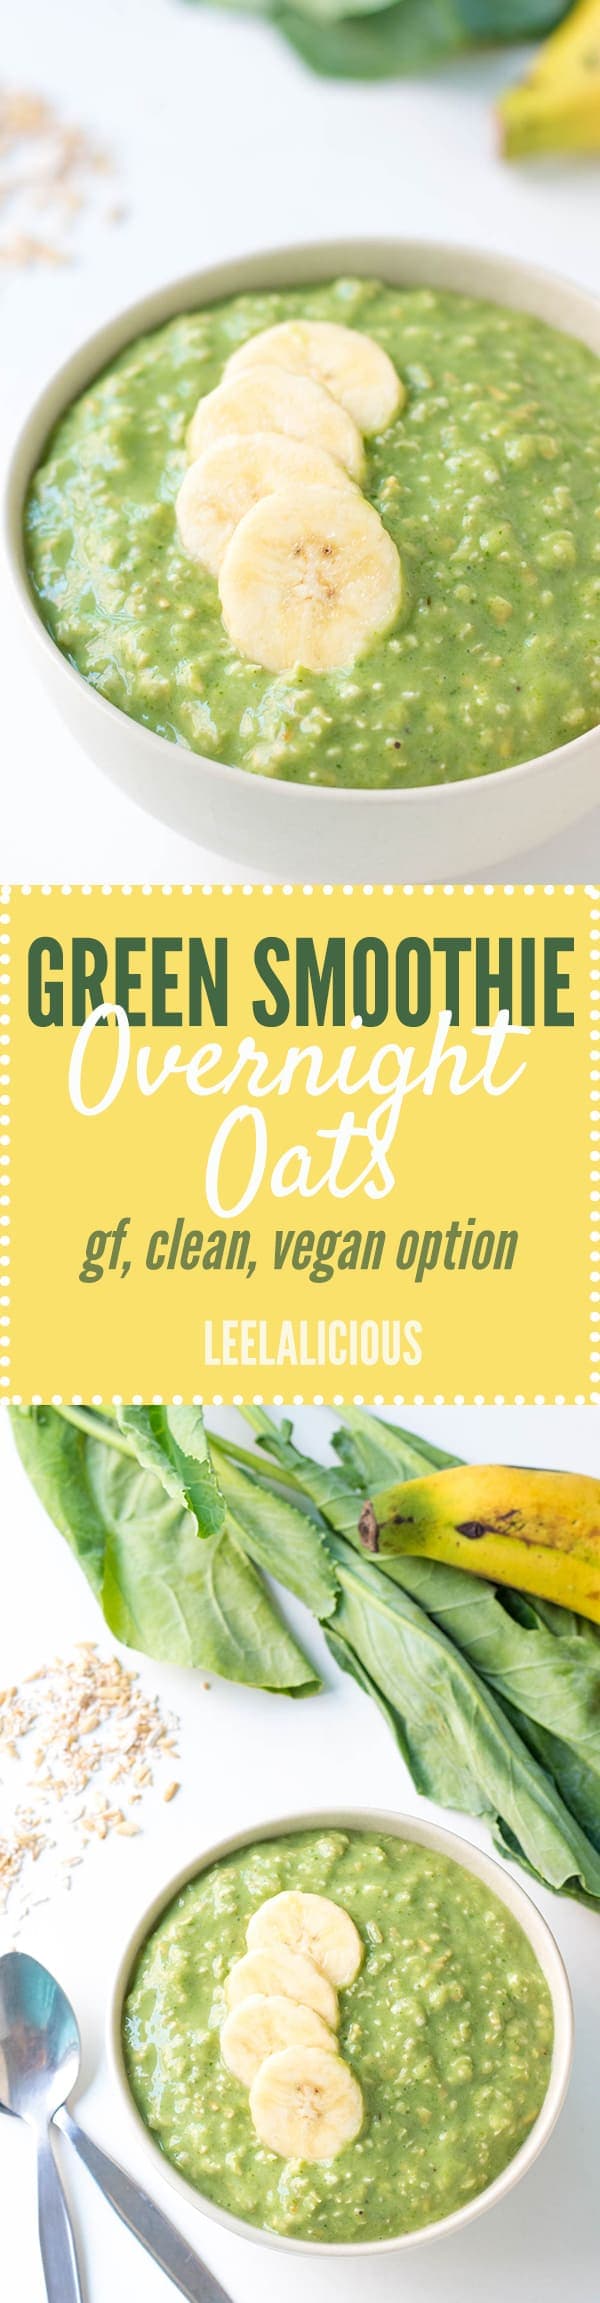 Can't decide whether to have a smoothie or oatmeal for breakfast? You don't have to with this green smoothie overnight oats recipe that allows you to have the best of both worlds. This healthy breakfast is gluten free, clean eating with vegan, dairy free option.